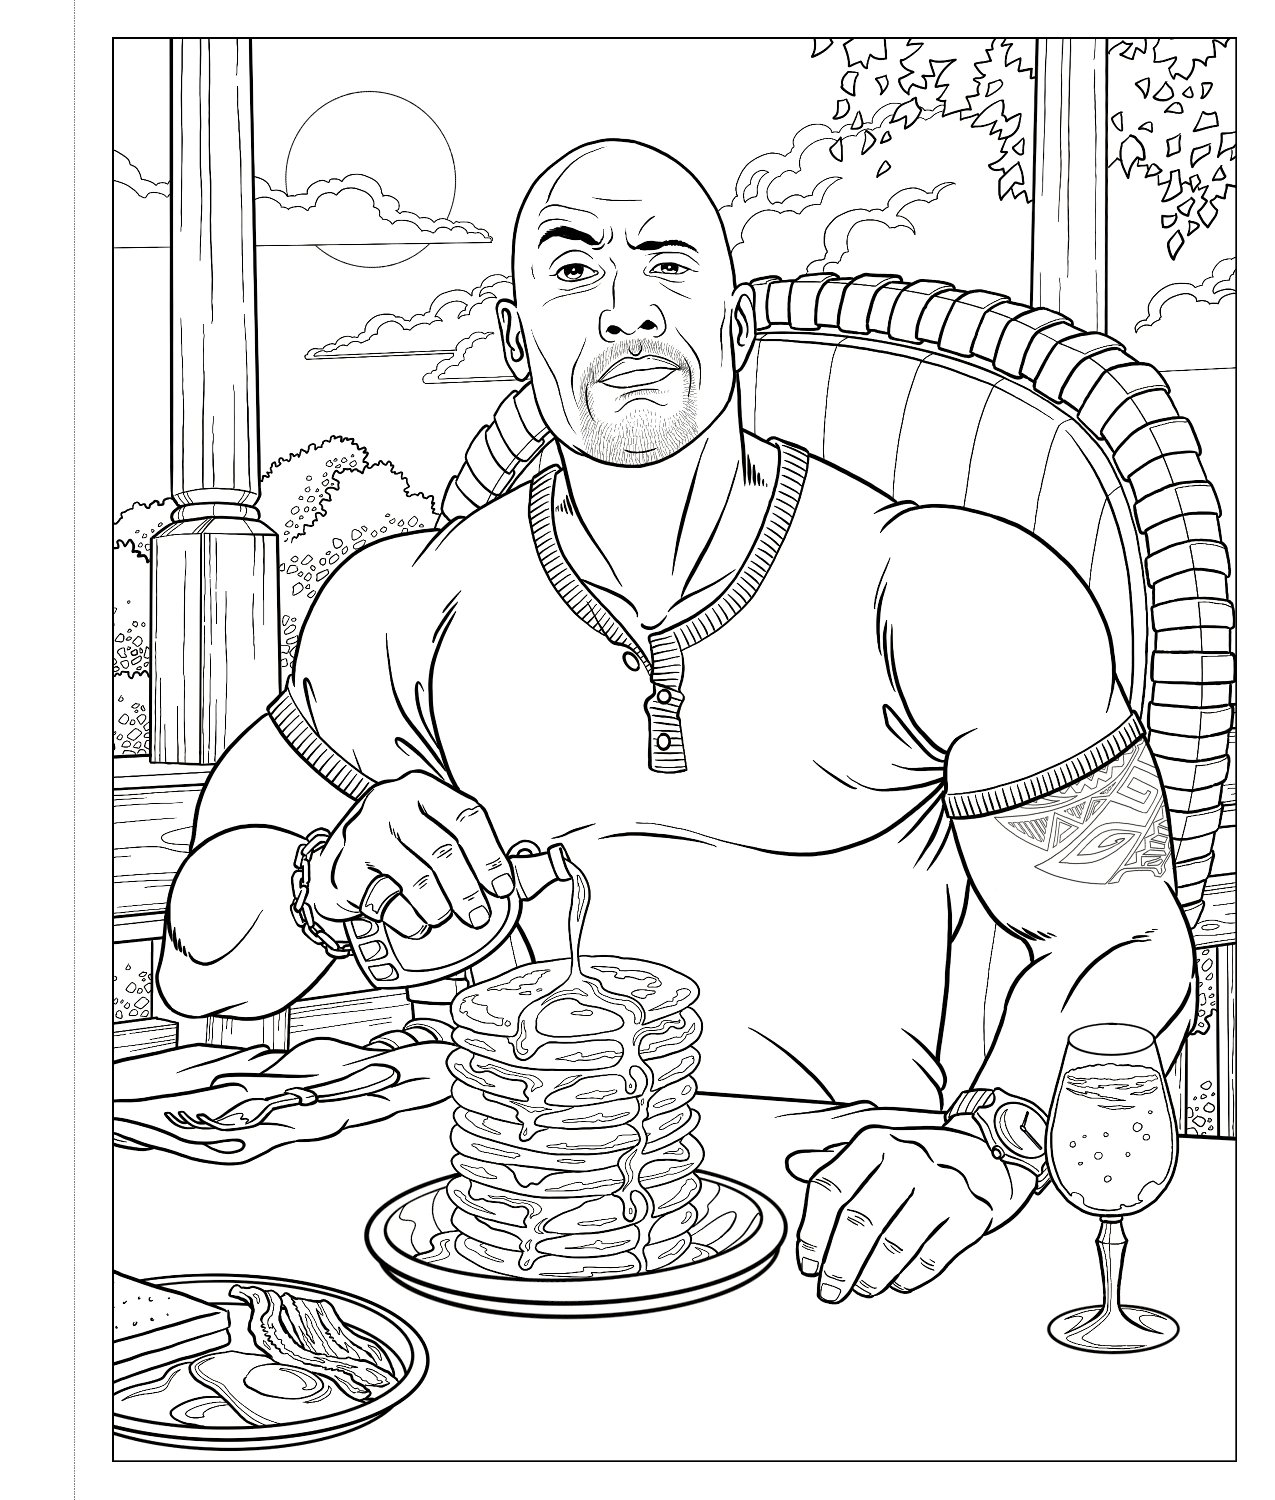 Crush and Color: Dwayne "The Rock" Johnson